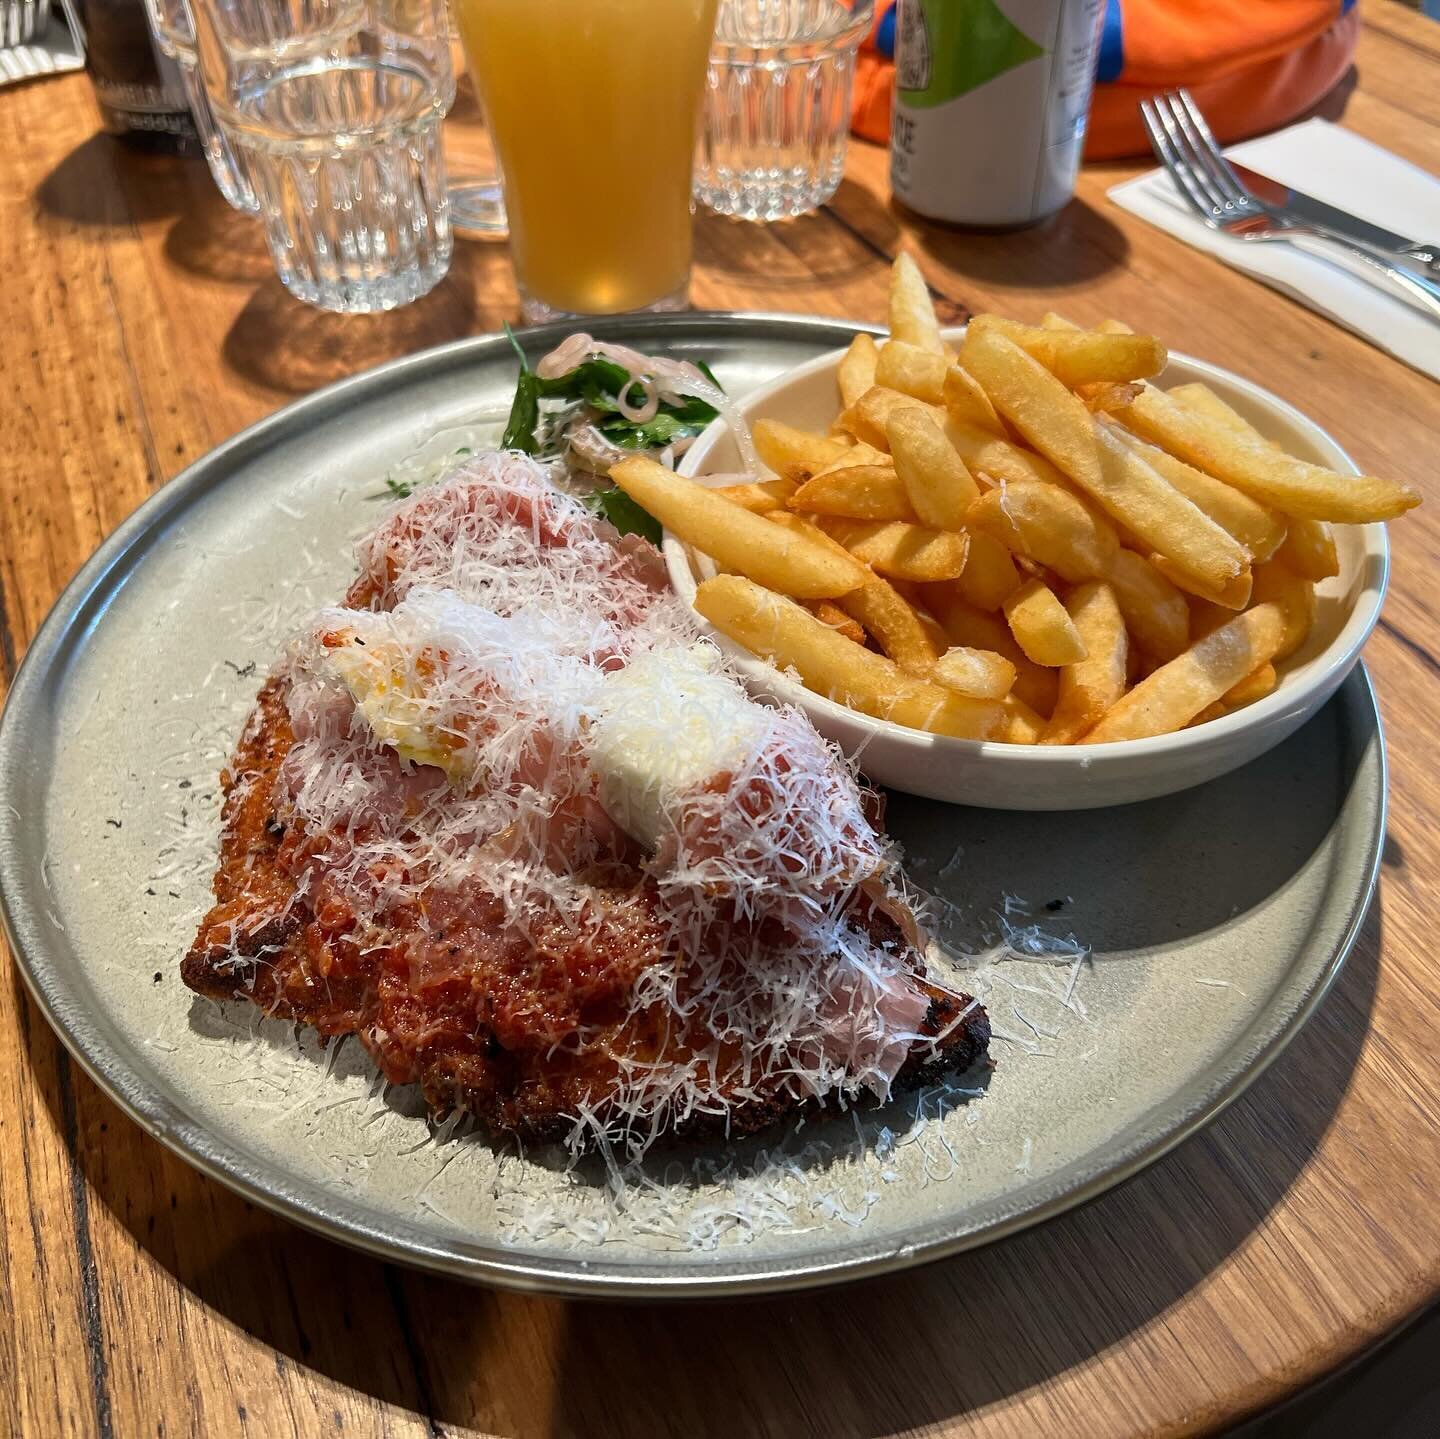 The Mighty has fallen! Relative newcomer to Mount Road @themightymooneeponds has already pulled up stumps and @mtalexanderhotel  has sprung up in its place, offering a very &ldquo;traditional&rdquo; Parma experience. Crispy schnitzel, tomato sugo, pr